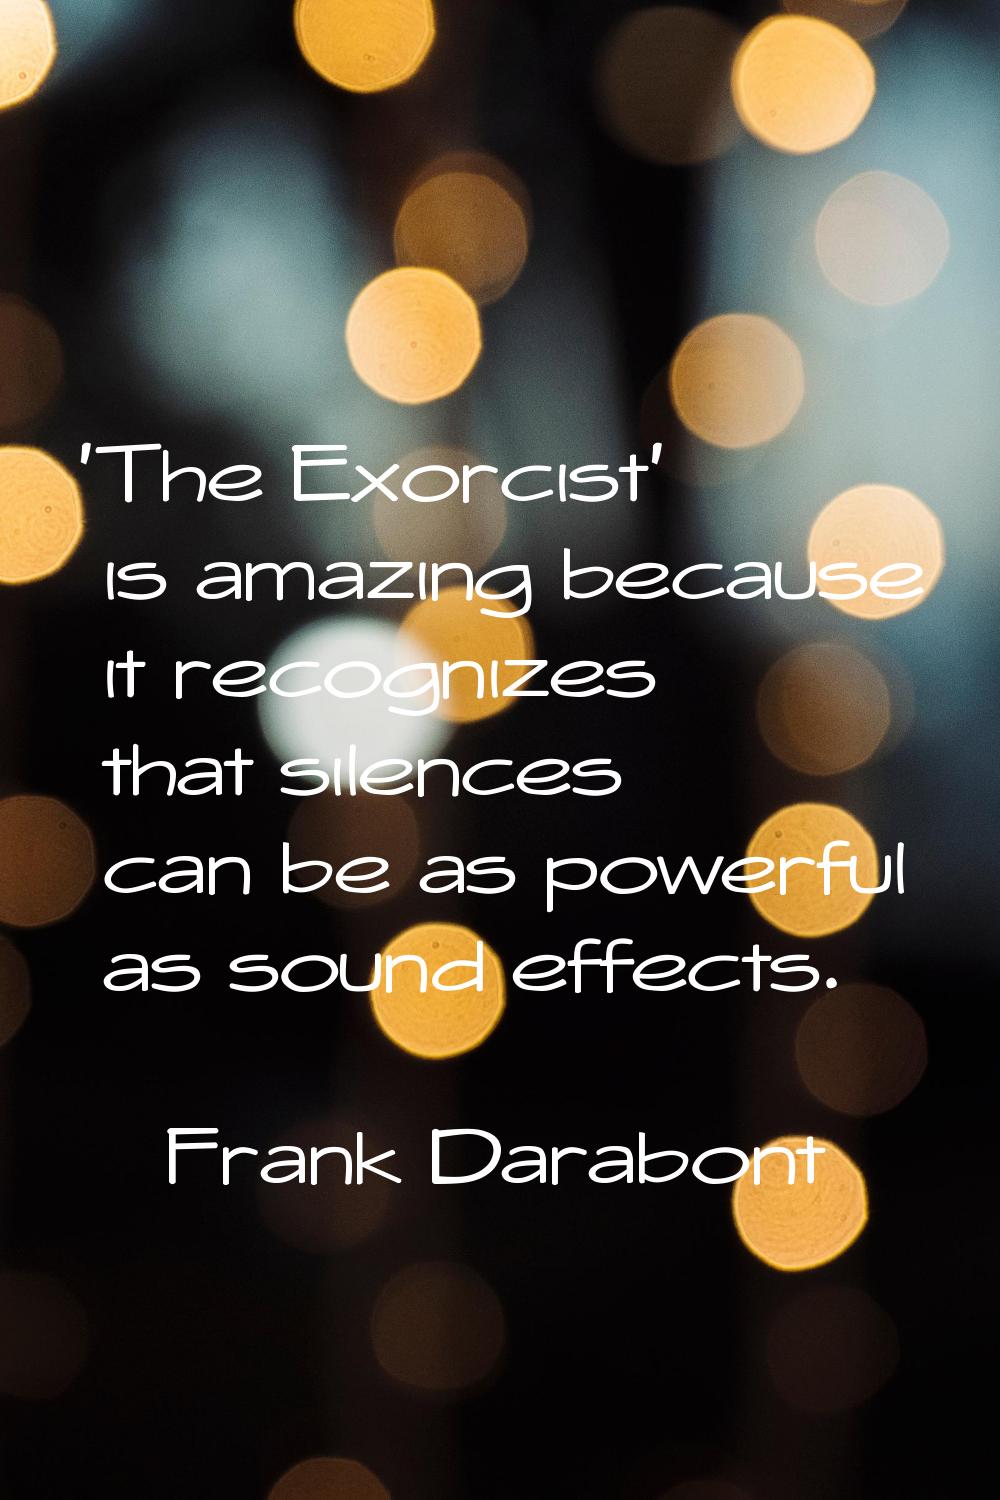 'The Exorcist' is amazing because it recognizes that silences can be as powerful as sound effects.